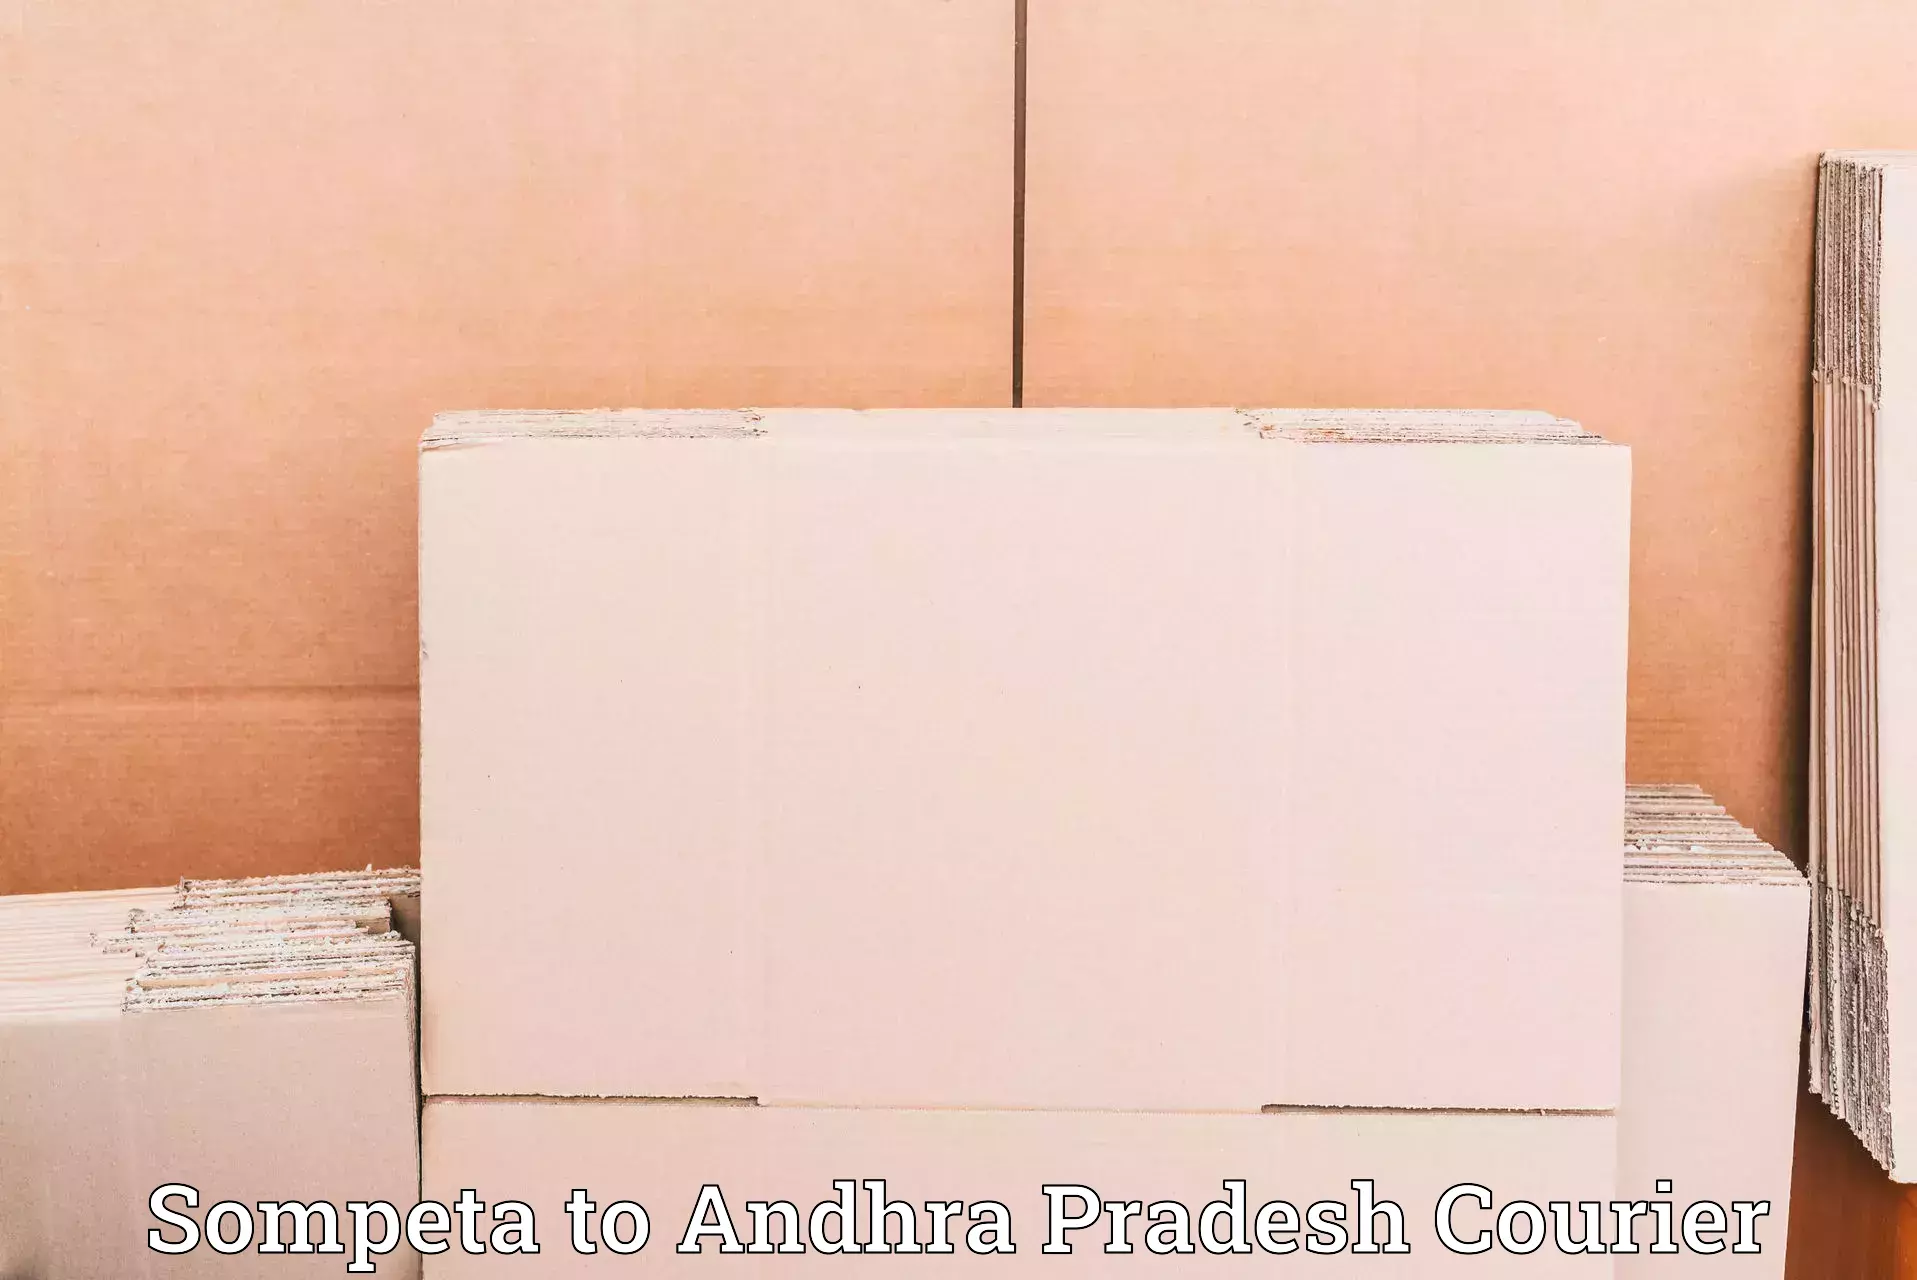 Customer-centric shipping Sompeta to Anantapur